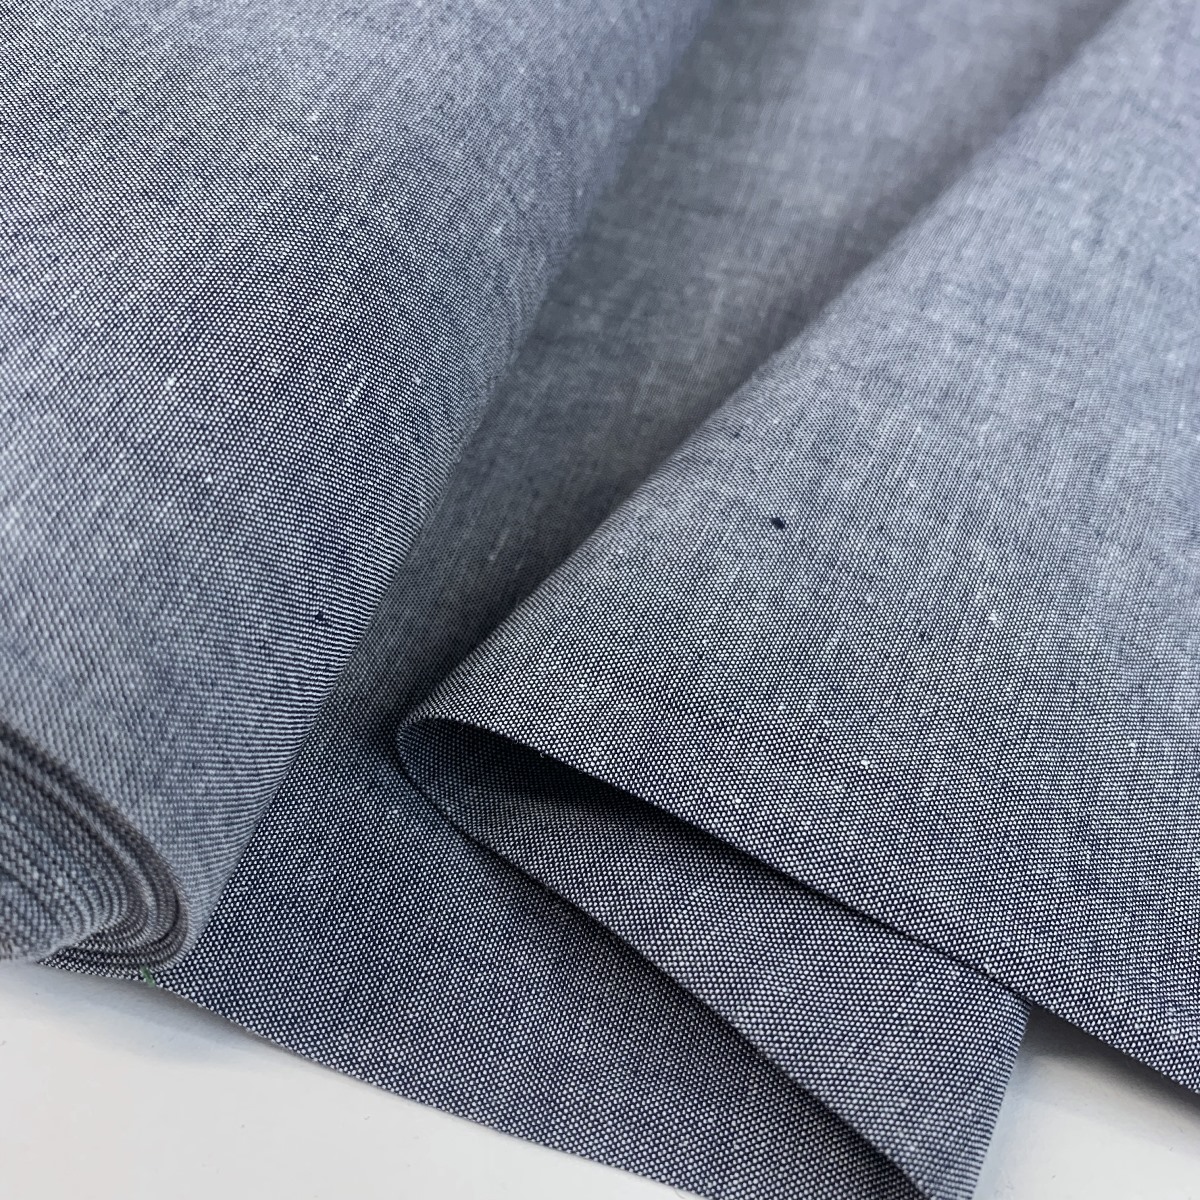 https://www.croftmill.fr/images/pictures/2-2021/08-august-2021-2/finest-chambray-navy-cotton-fabric-fold.jpg?v=73baaccc